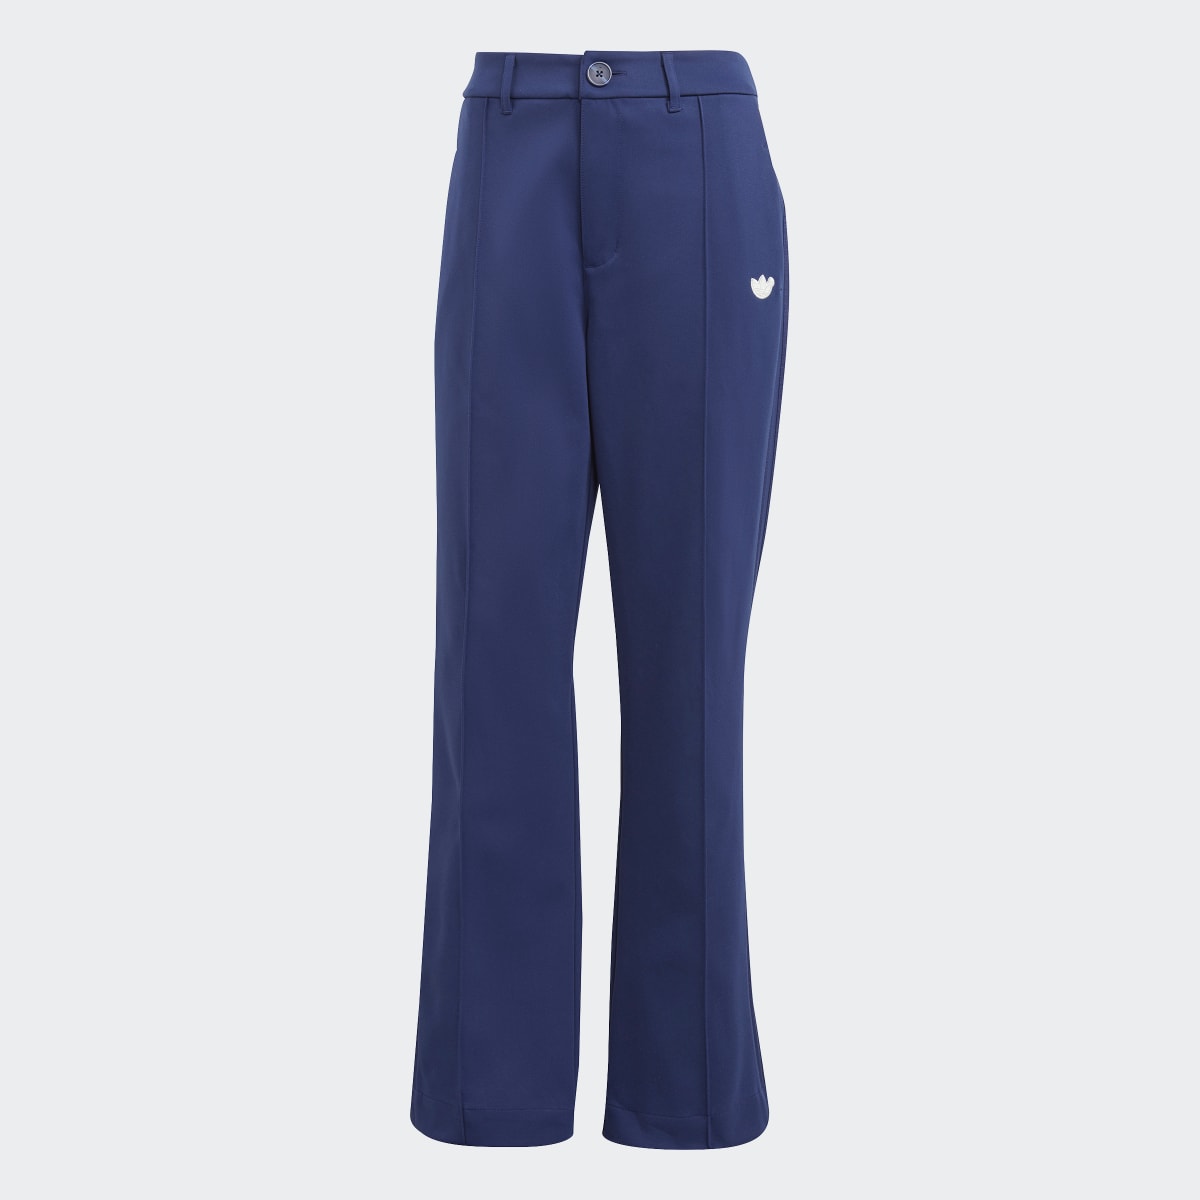 Adidas Blue Version Club High-Waisted Tracksuit Bottoms. 4